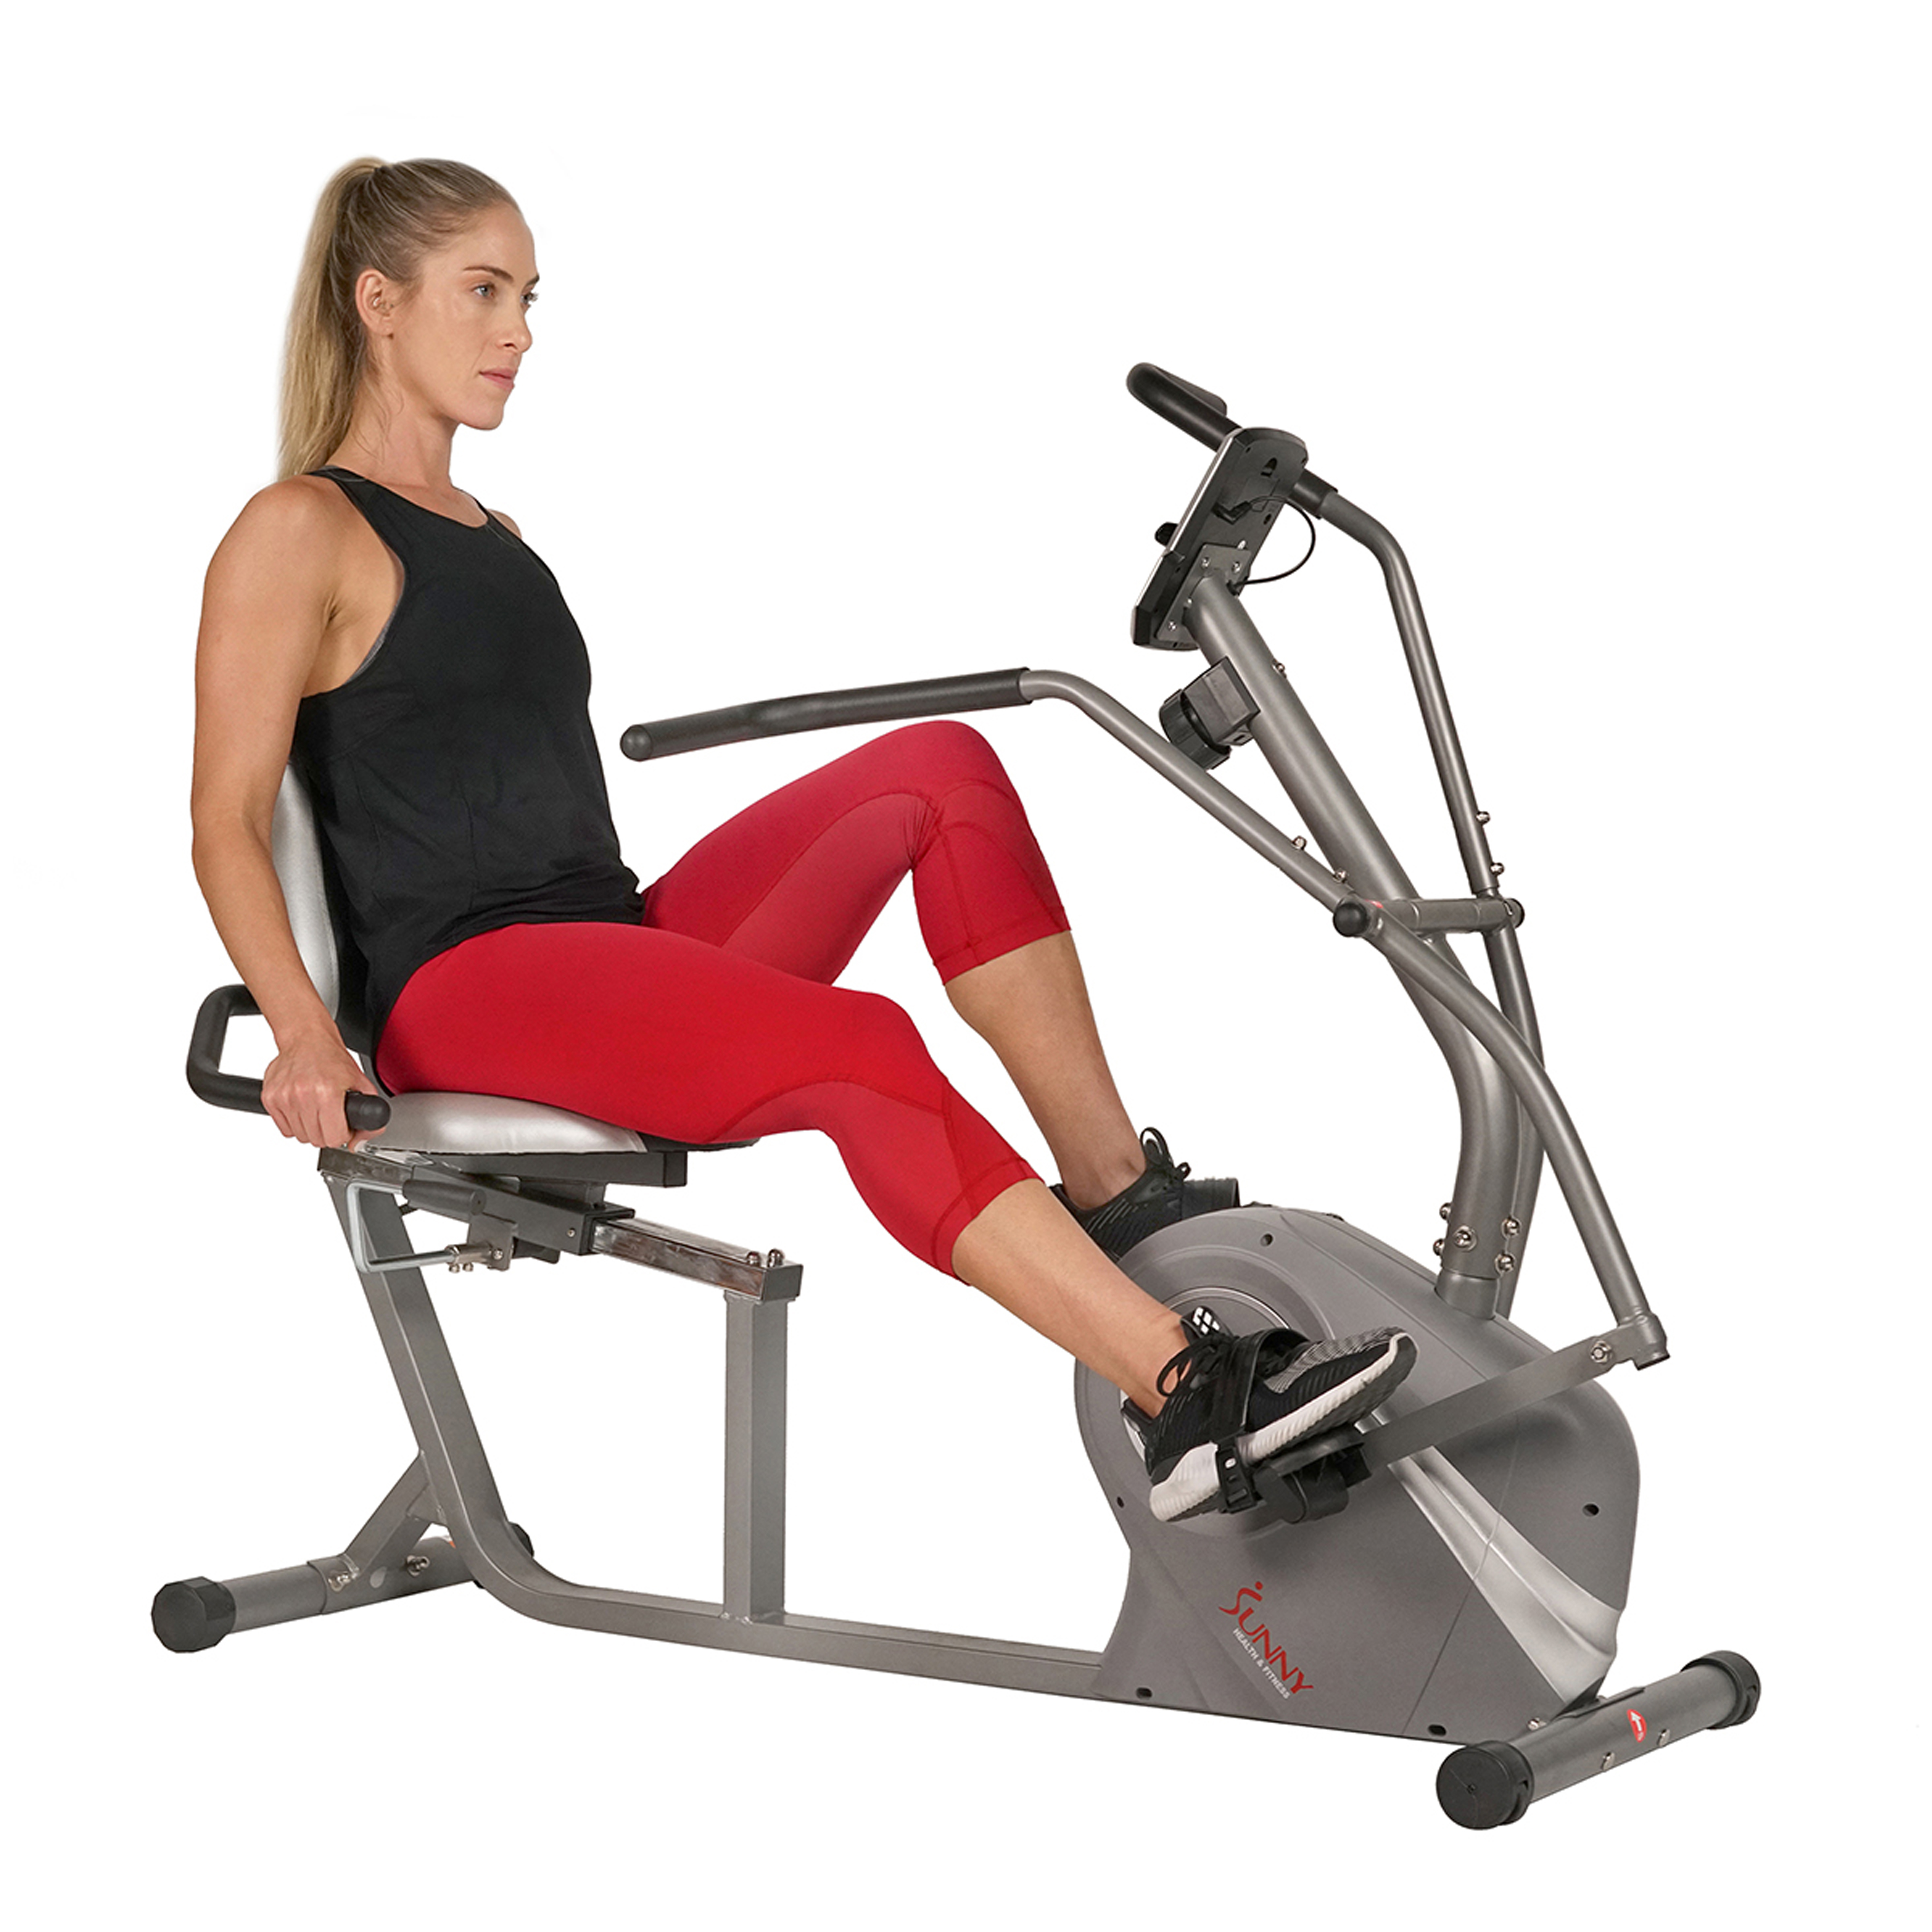 Sunny Health & Fitness Cross Trainer Magnetic Recumbent Bike with Arm Exercisers - SF-RB4936 - image 8 of 11